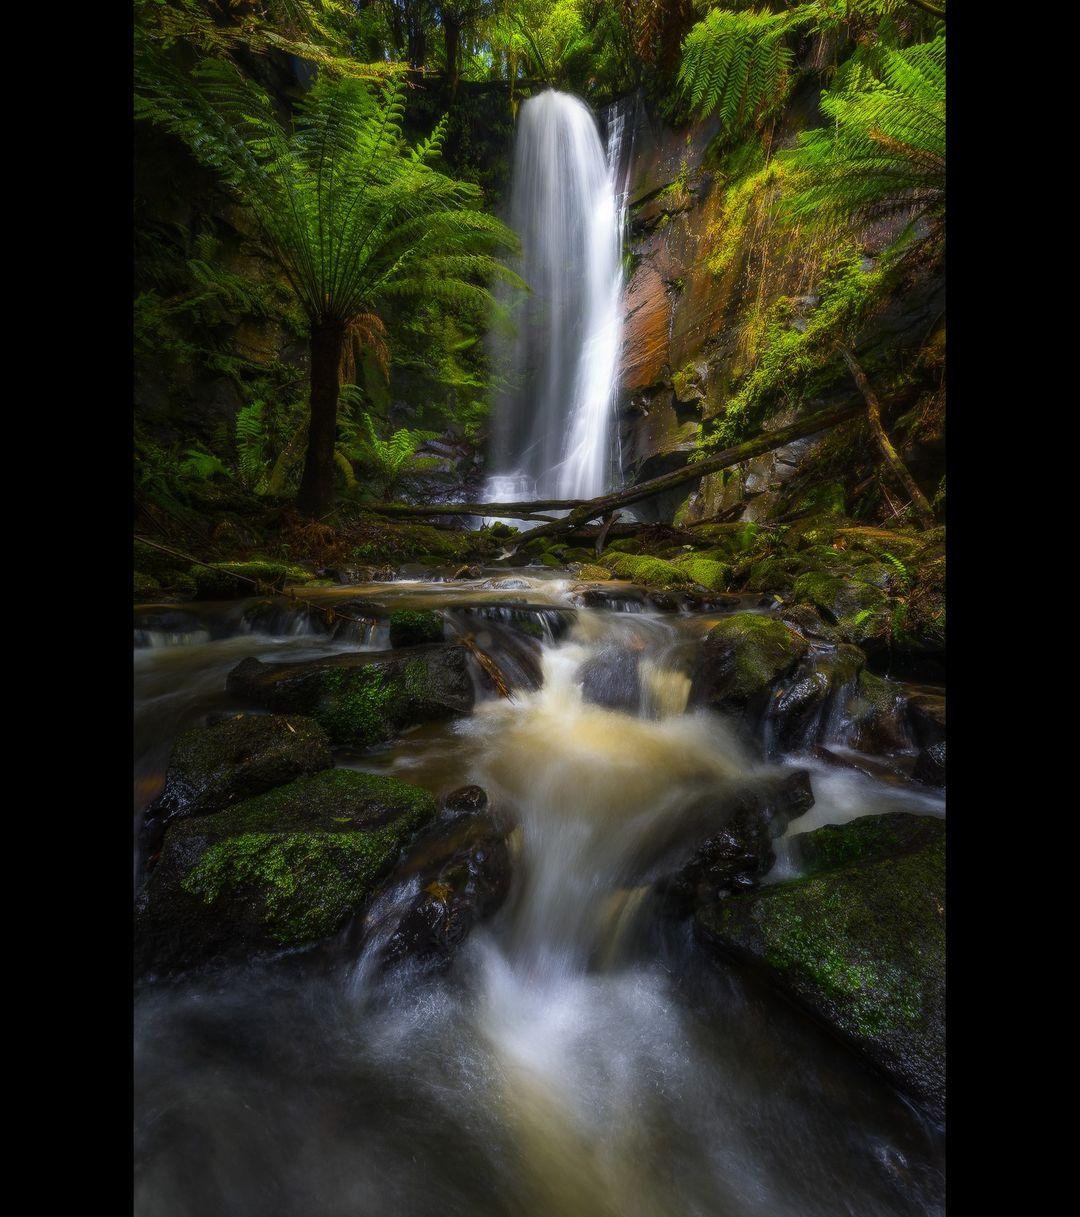 class="content__text"
 Can't drive past the Ocean Road without visiting some of the many waterfalls in the Otways! We seem to always visit the ranges in bright sunny weather which makes photographing falls tricky but dynamic! Hope you enjoy these images of Upper Chappel , Marriners and Beauchamp Falls :)

 #everlookphotography #australia #seeaustralia #nisifilters #victoria #otways #greatoceanroad #waterfall #lavershill 
 